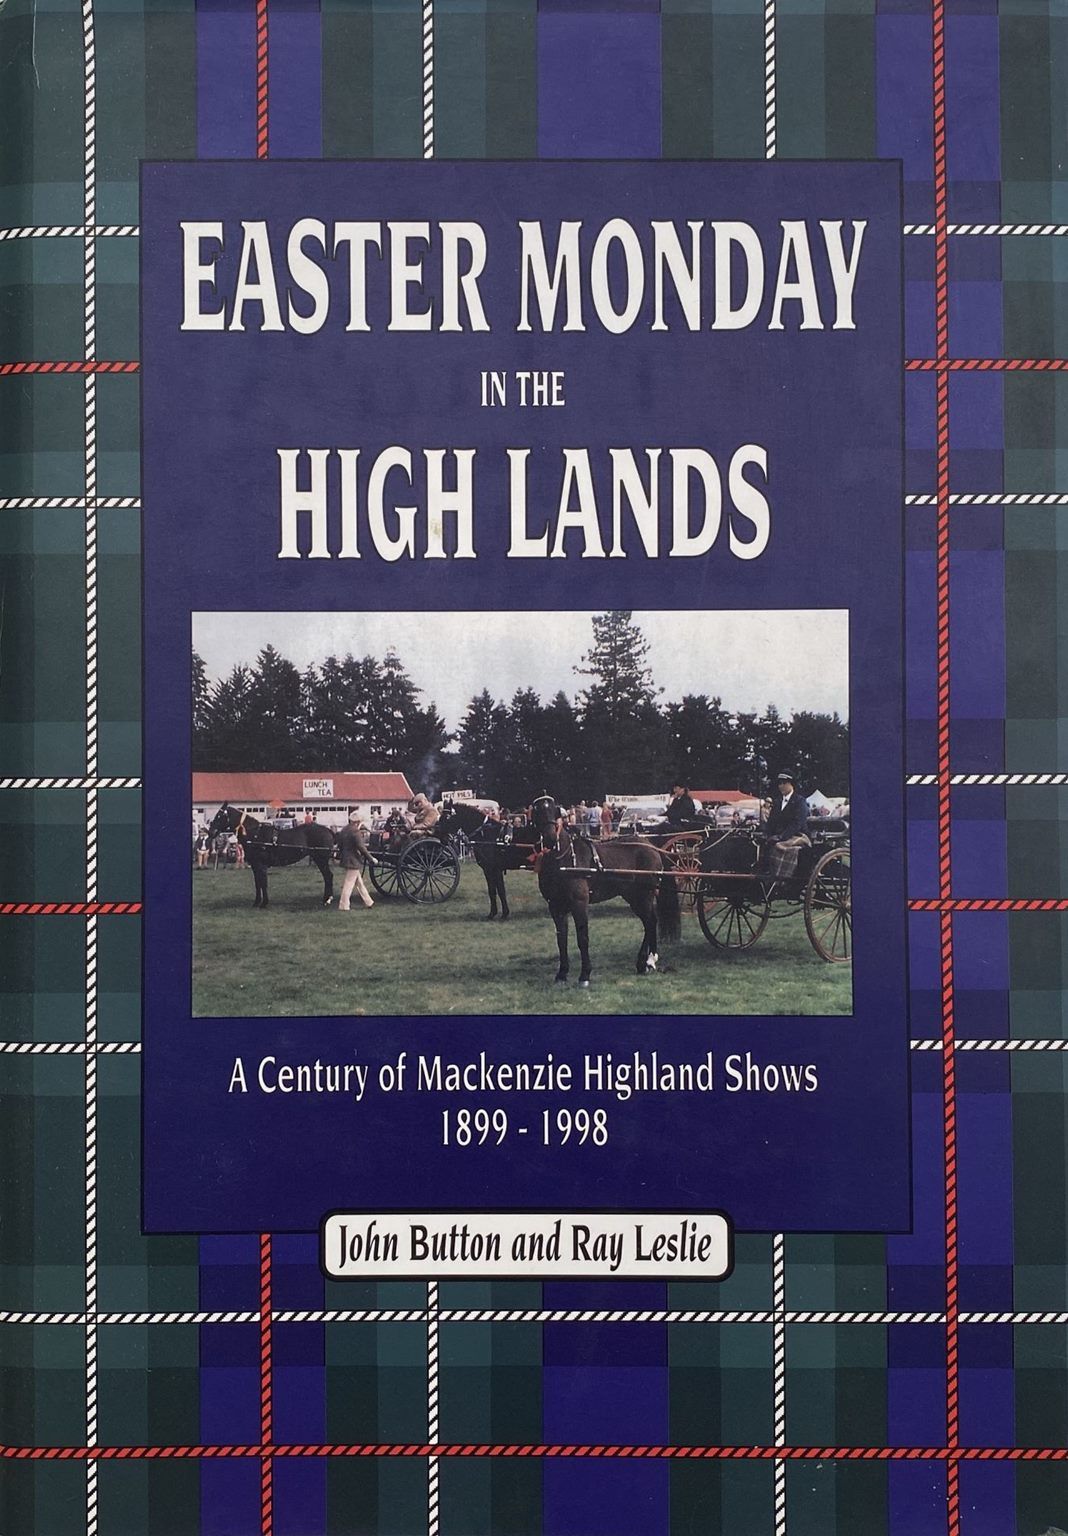 EASTER MONDAY IN THE HIGH LANDS: A Century of Mackenzie Highland Shows 1899-1998